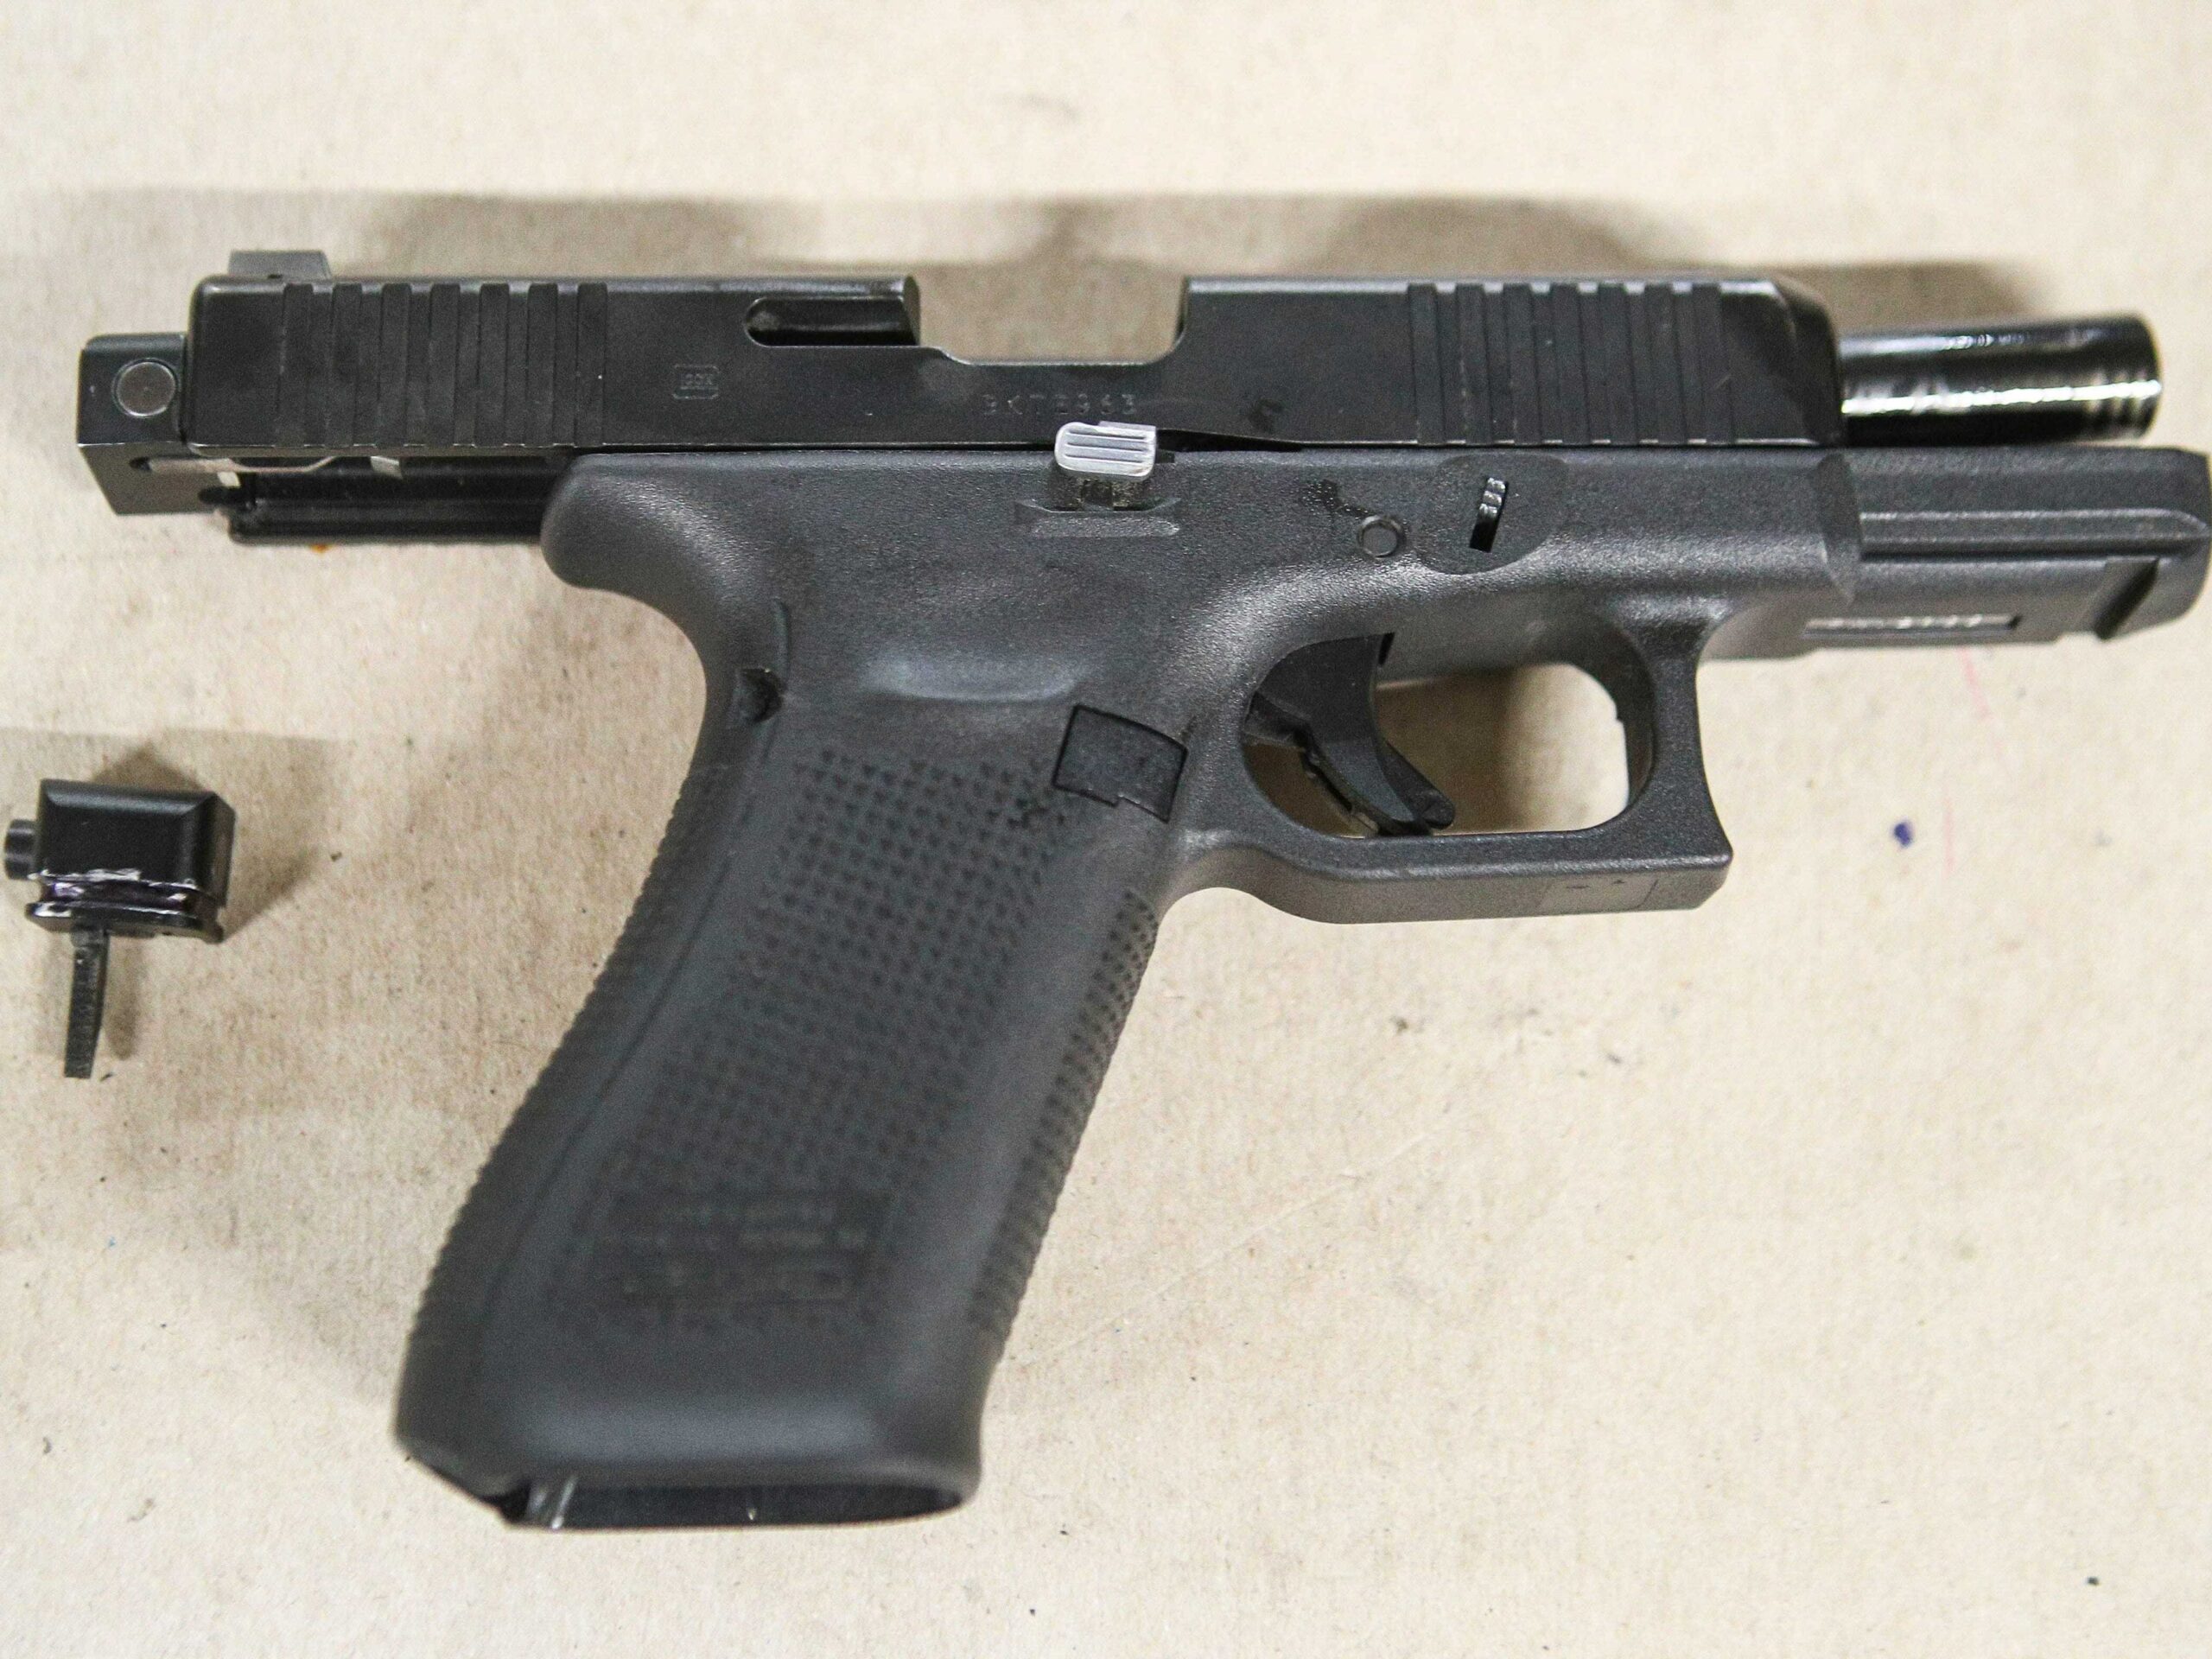 New York proposes a ban on guns that are easy to convert to illegal automatic weapons